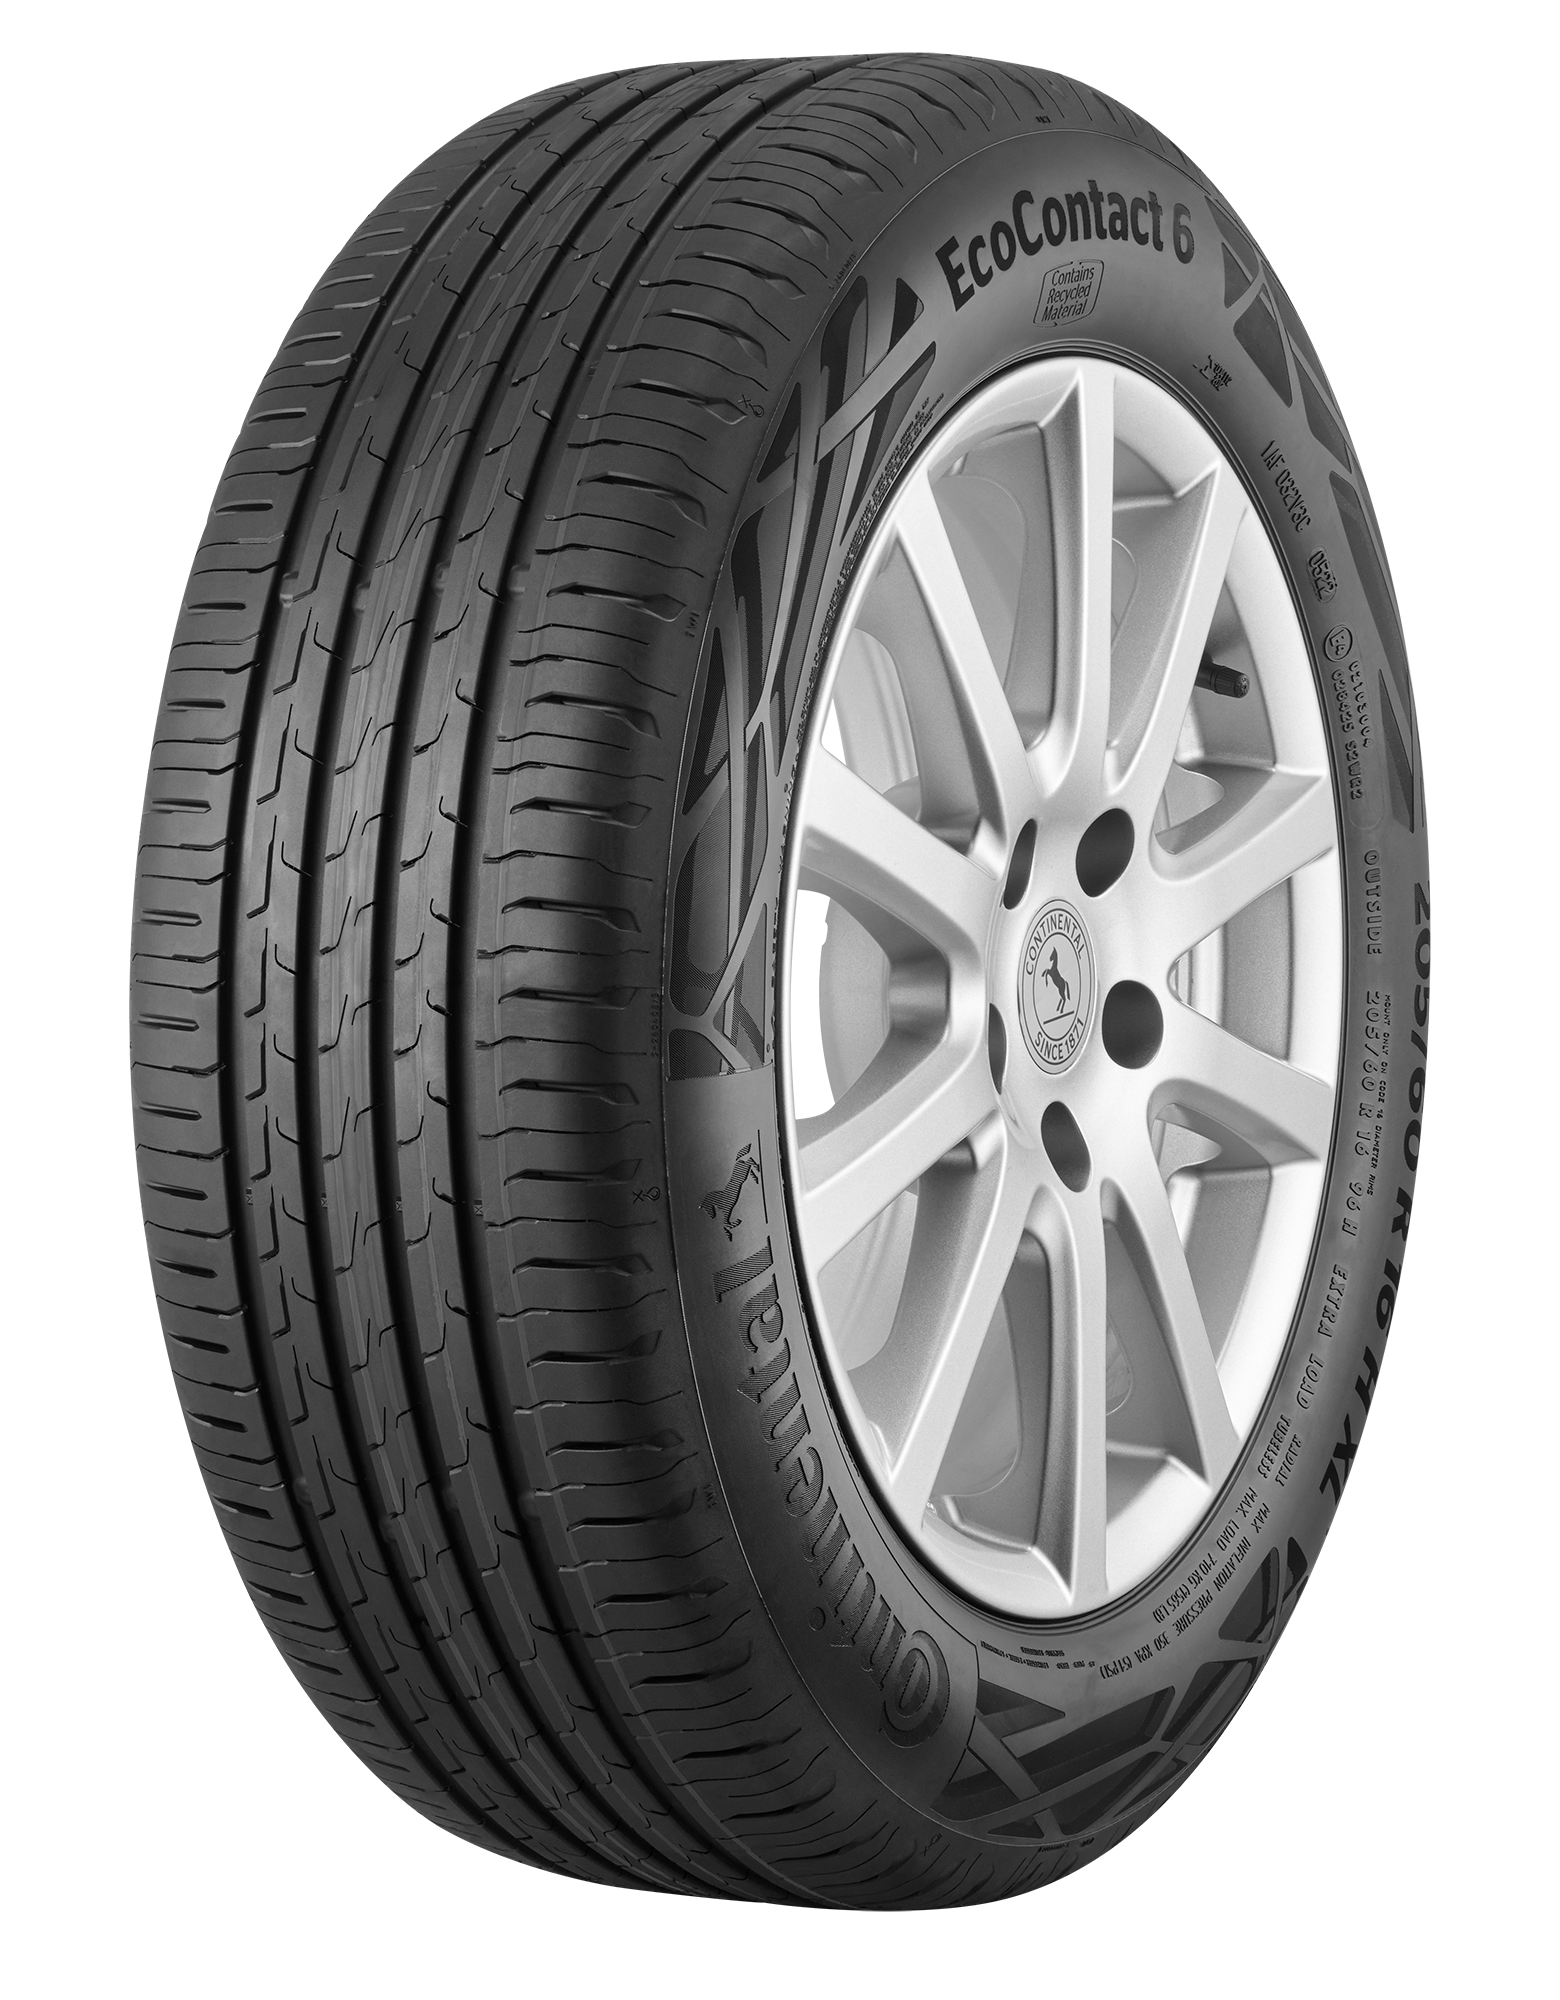 Continental Launches First Tires with Polyester Made from Recycled PET  Bottles - Continental AG